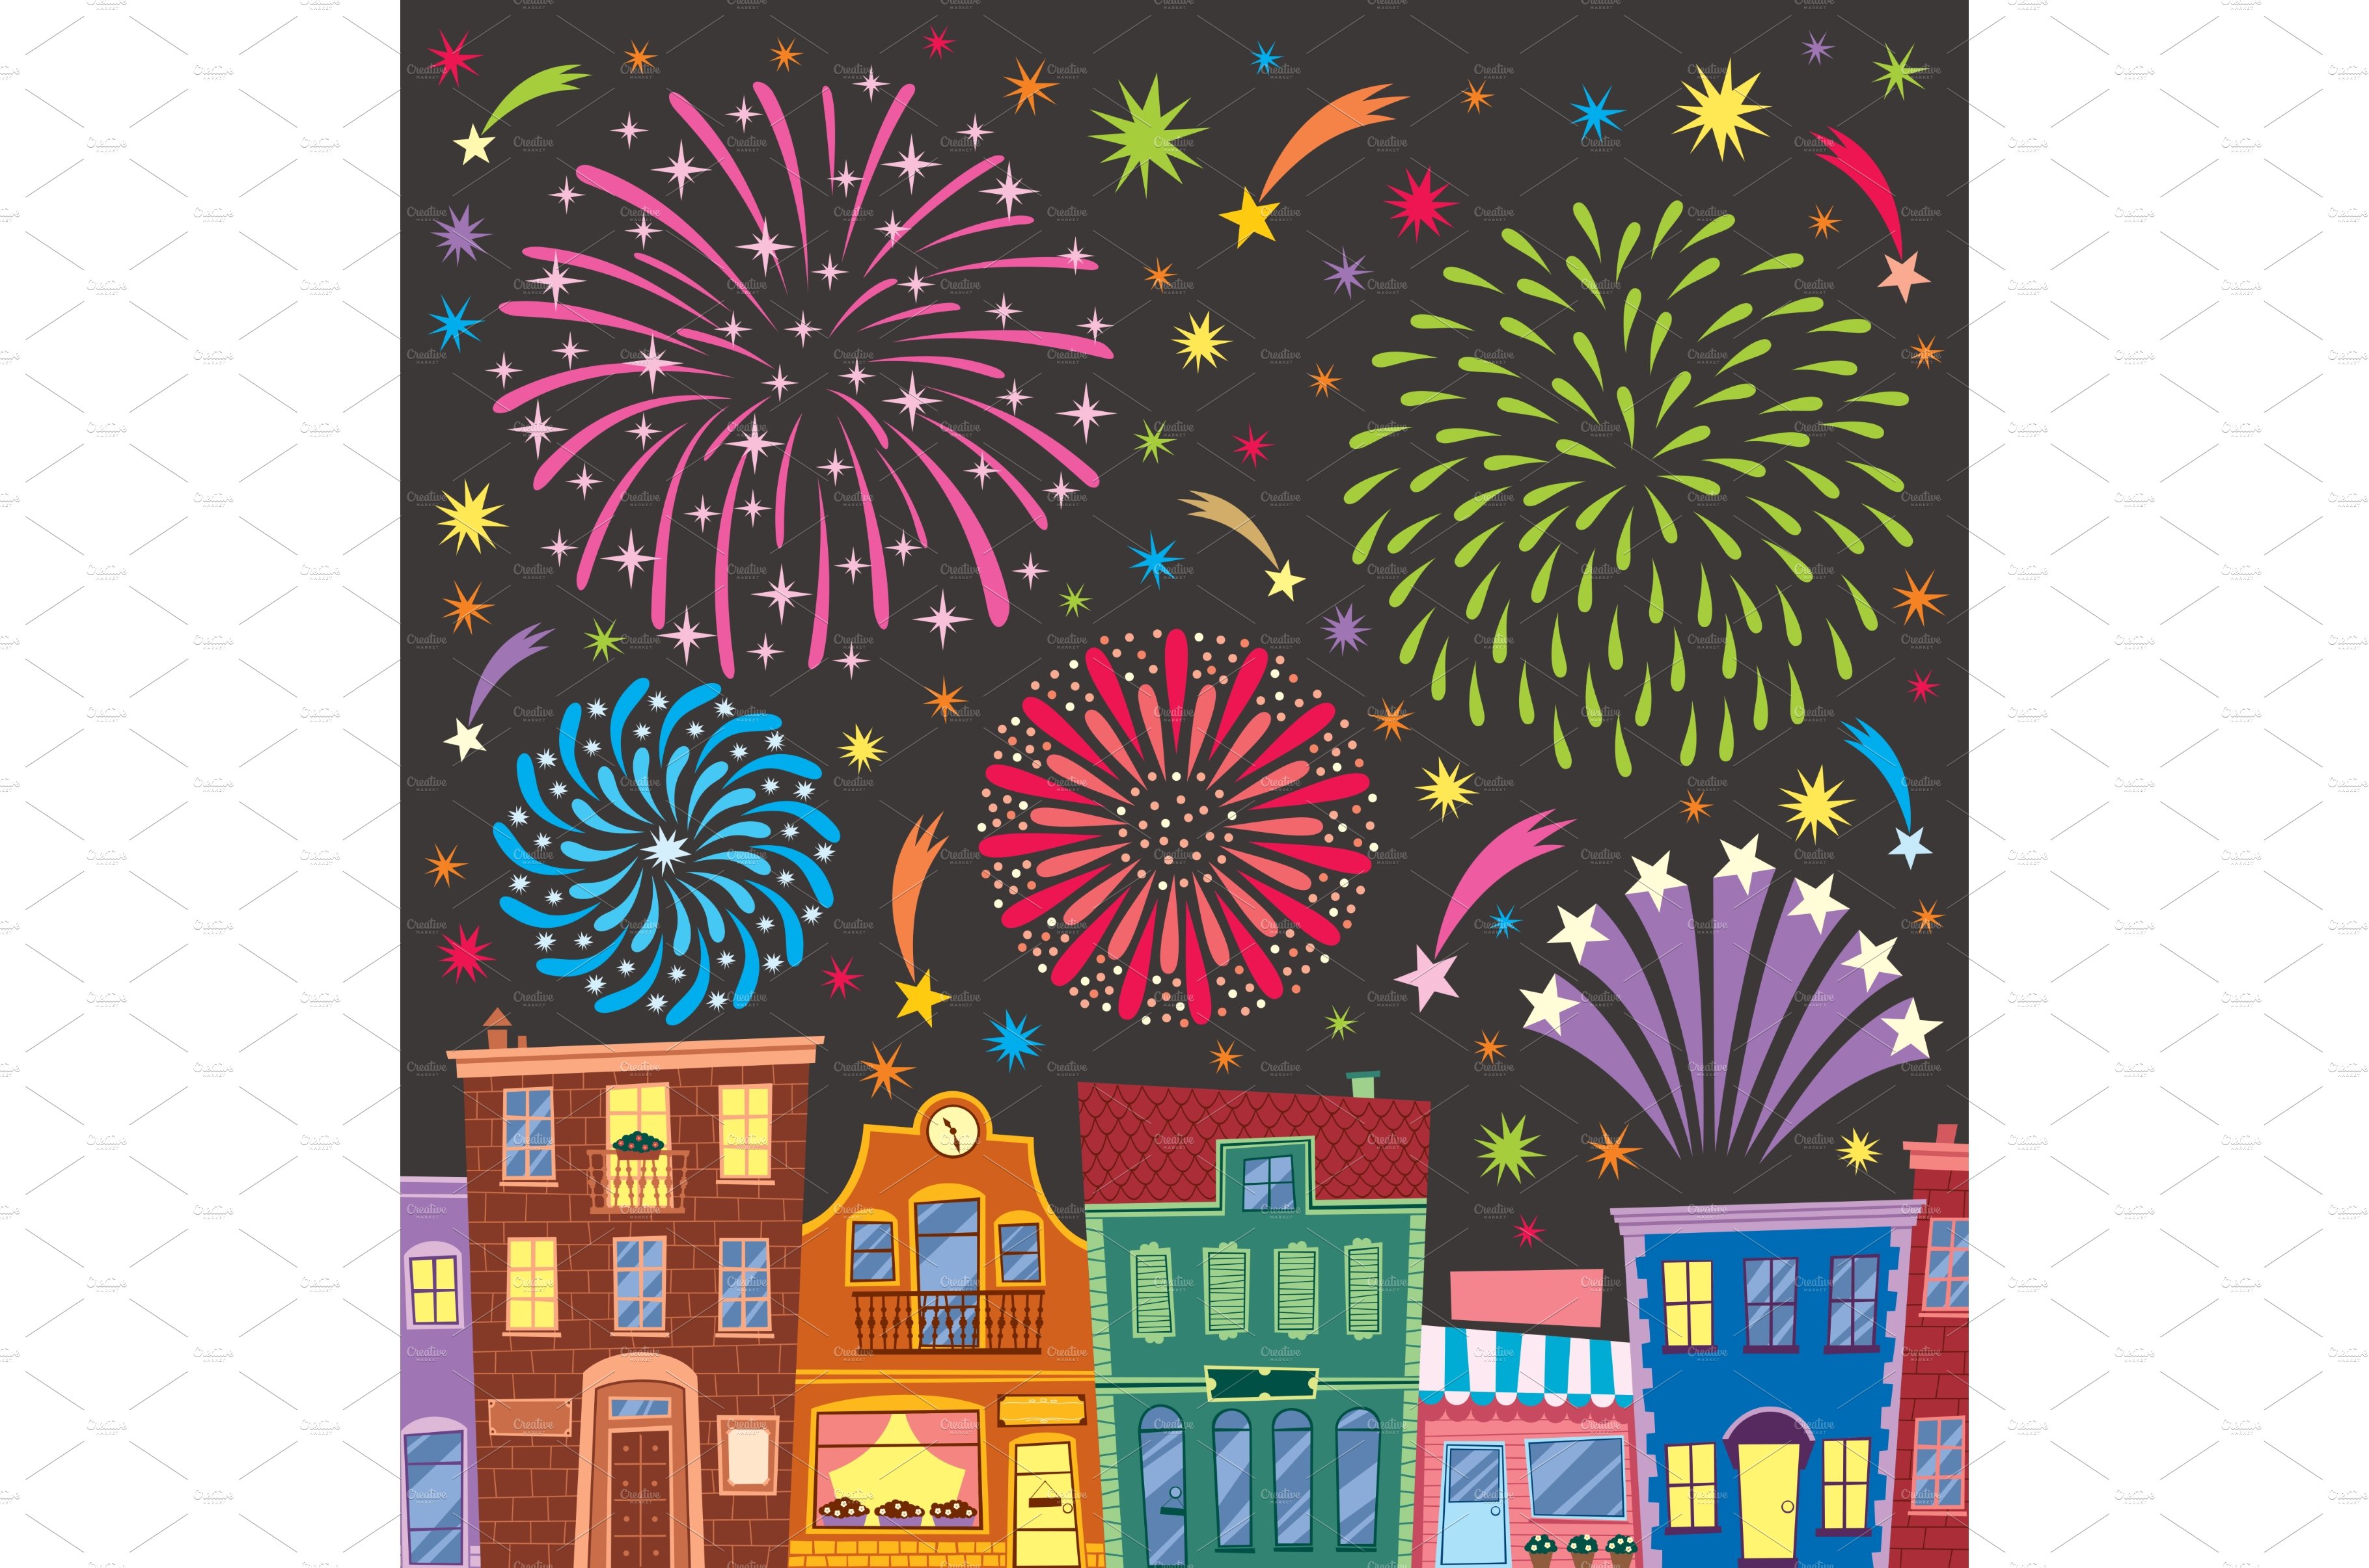 Fireworks cover image.